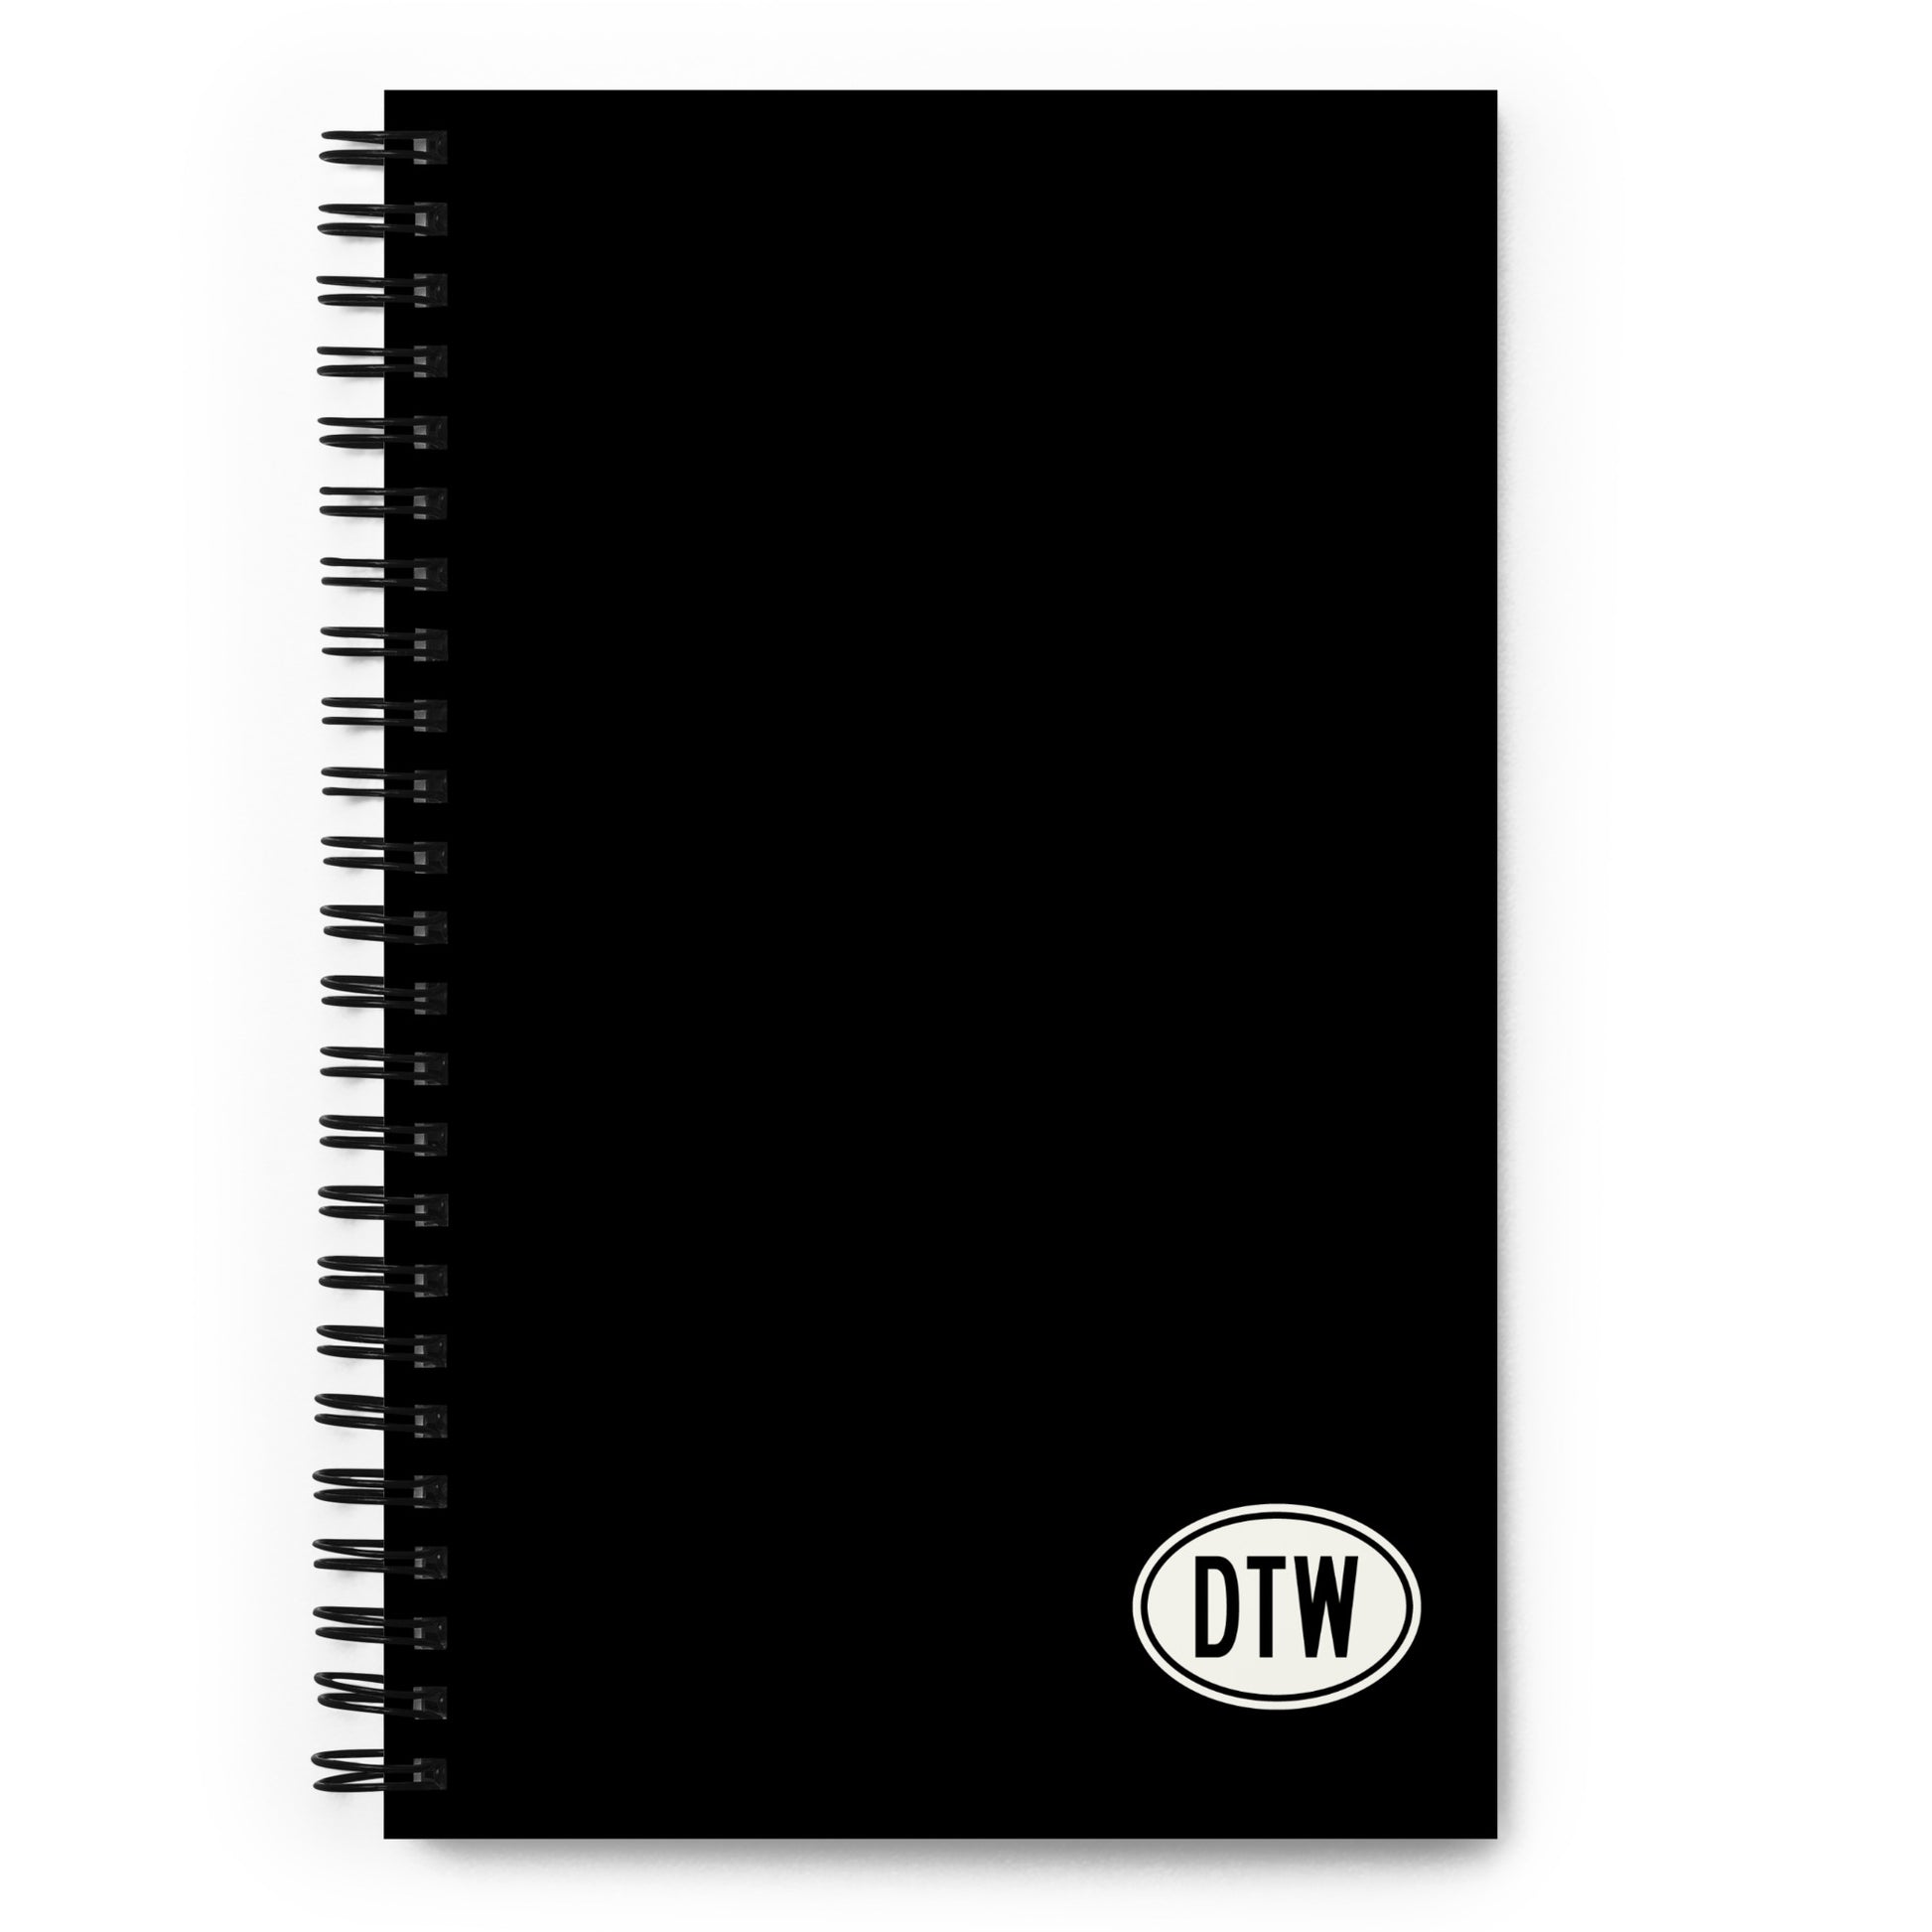 Unique Travel Gift Spiral Notebook - White Oval • DTW Detroit • YHM Designs - Image 01